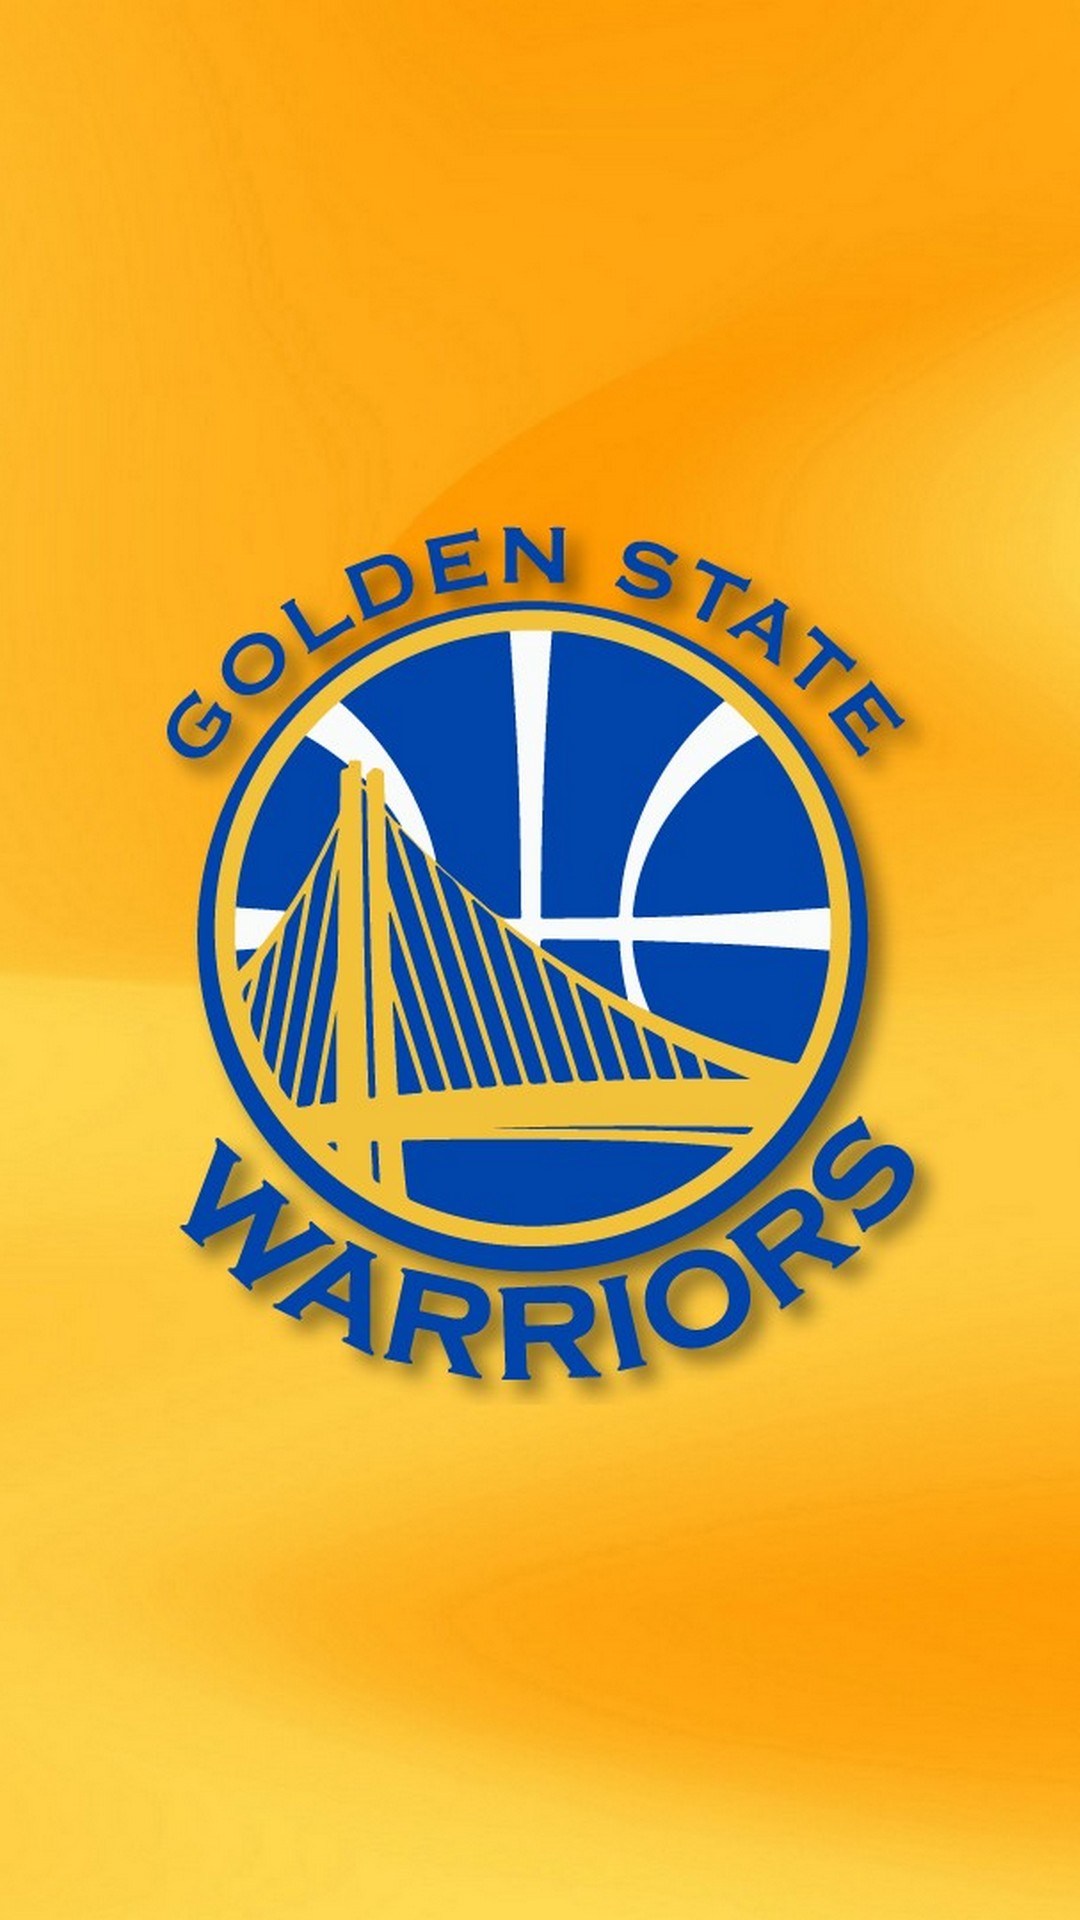 Golden State Warriors Wallpaper For Phone With Resolution 1080X1920 pixel. You can make this wallpaper for your Desktop Computer Backgrounds, Mac Wallpapers, Android Lock screen or iPhone Screensavers